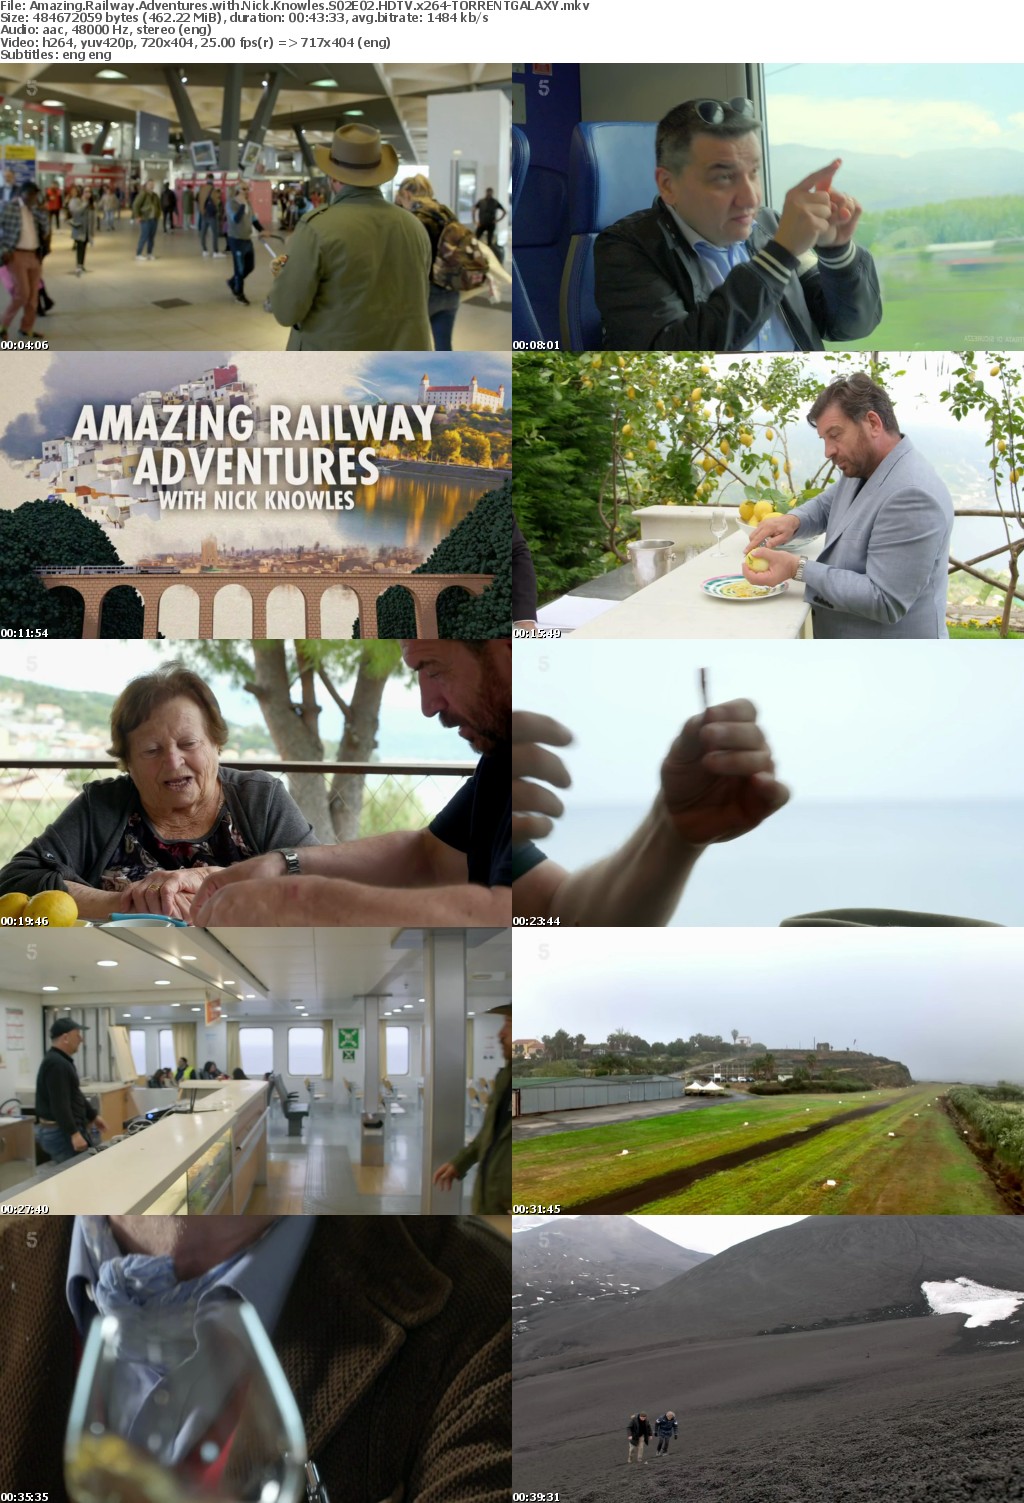 Amazing Railway Adventures with Nick Knowles S02E02 HDTV x264-GALAXY